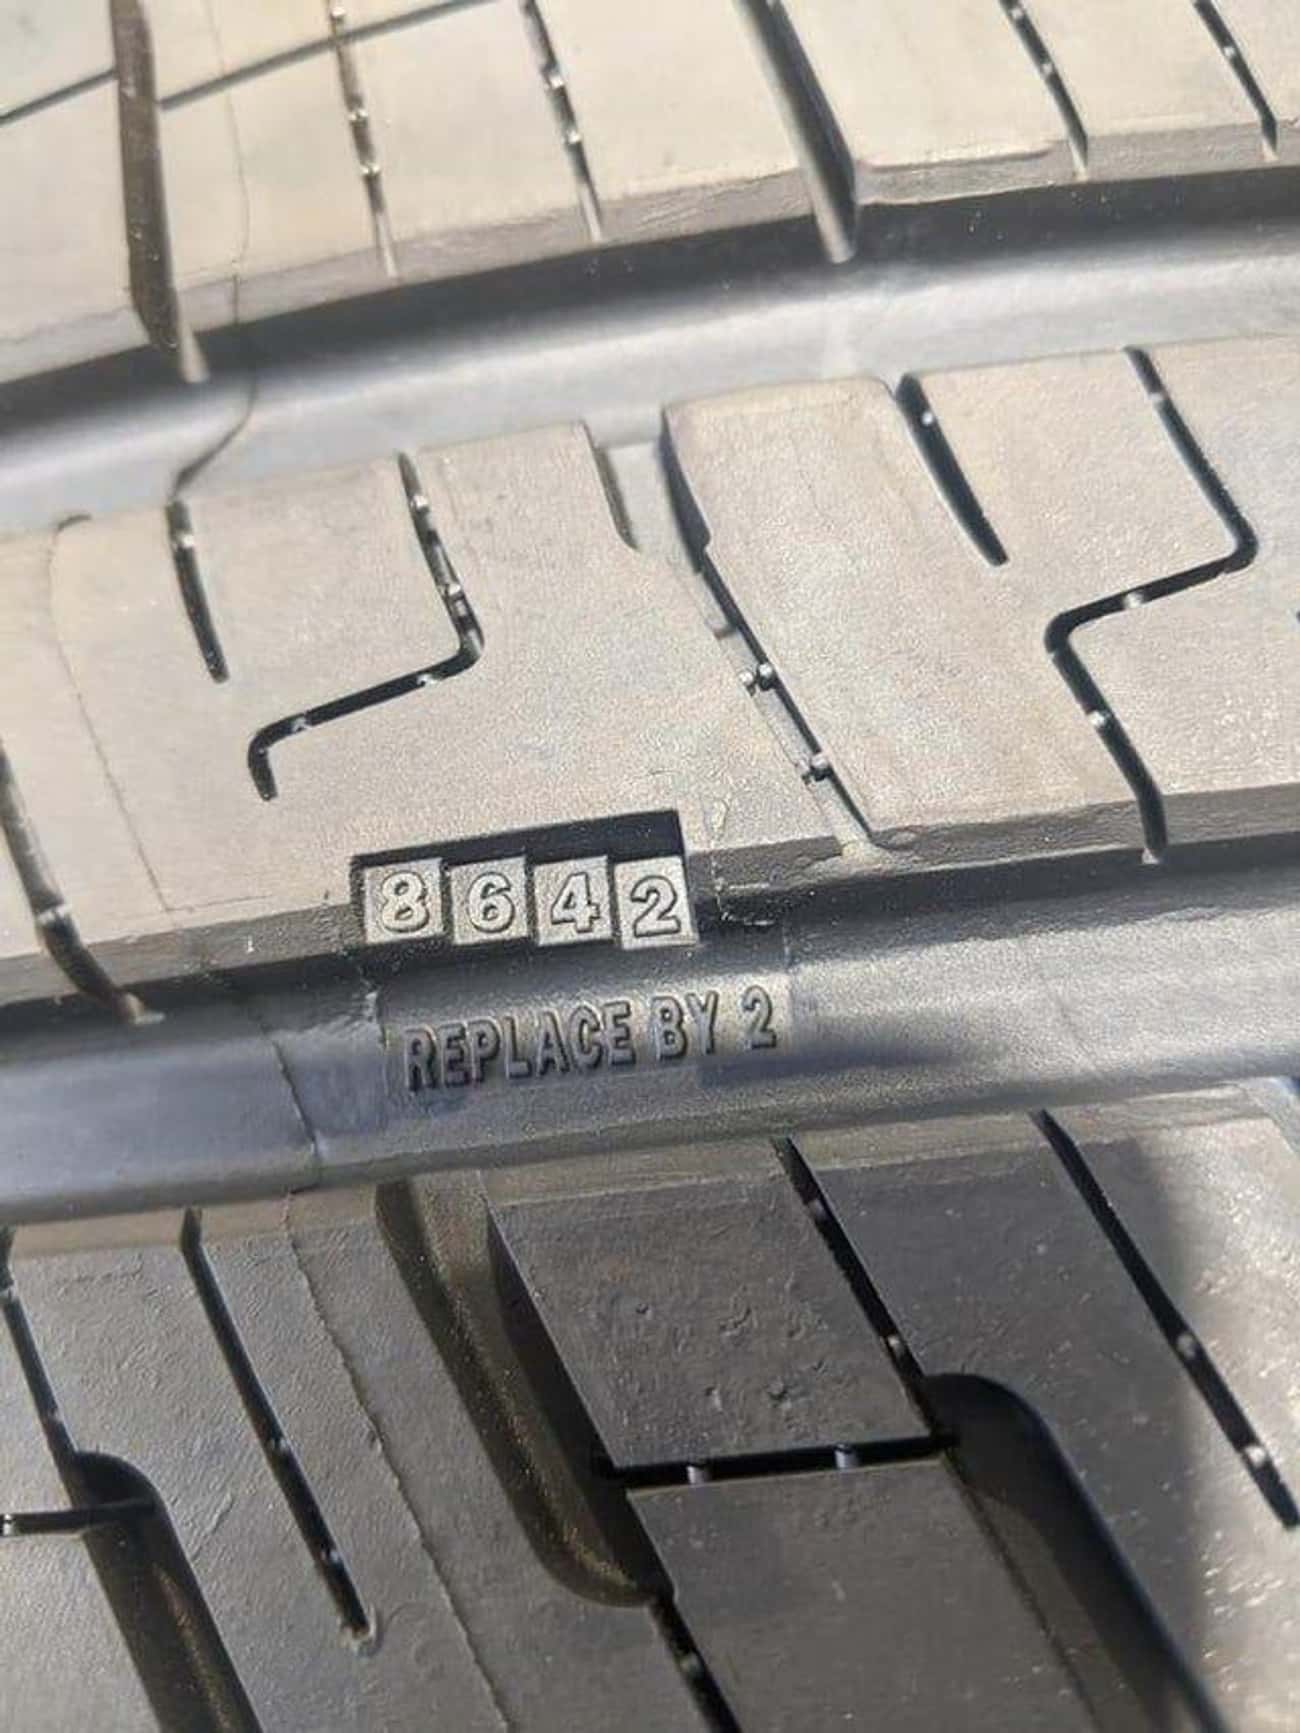 The Tire Wear Gauge On These Tires